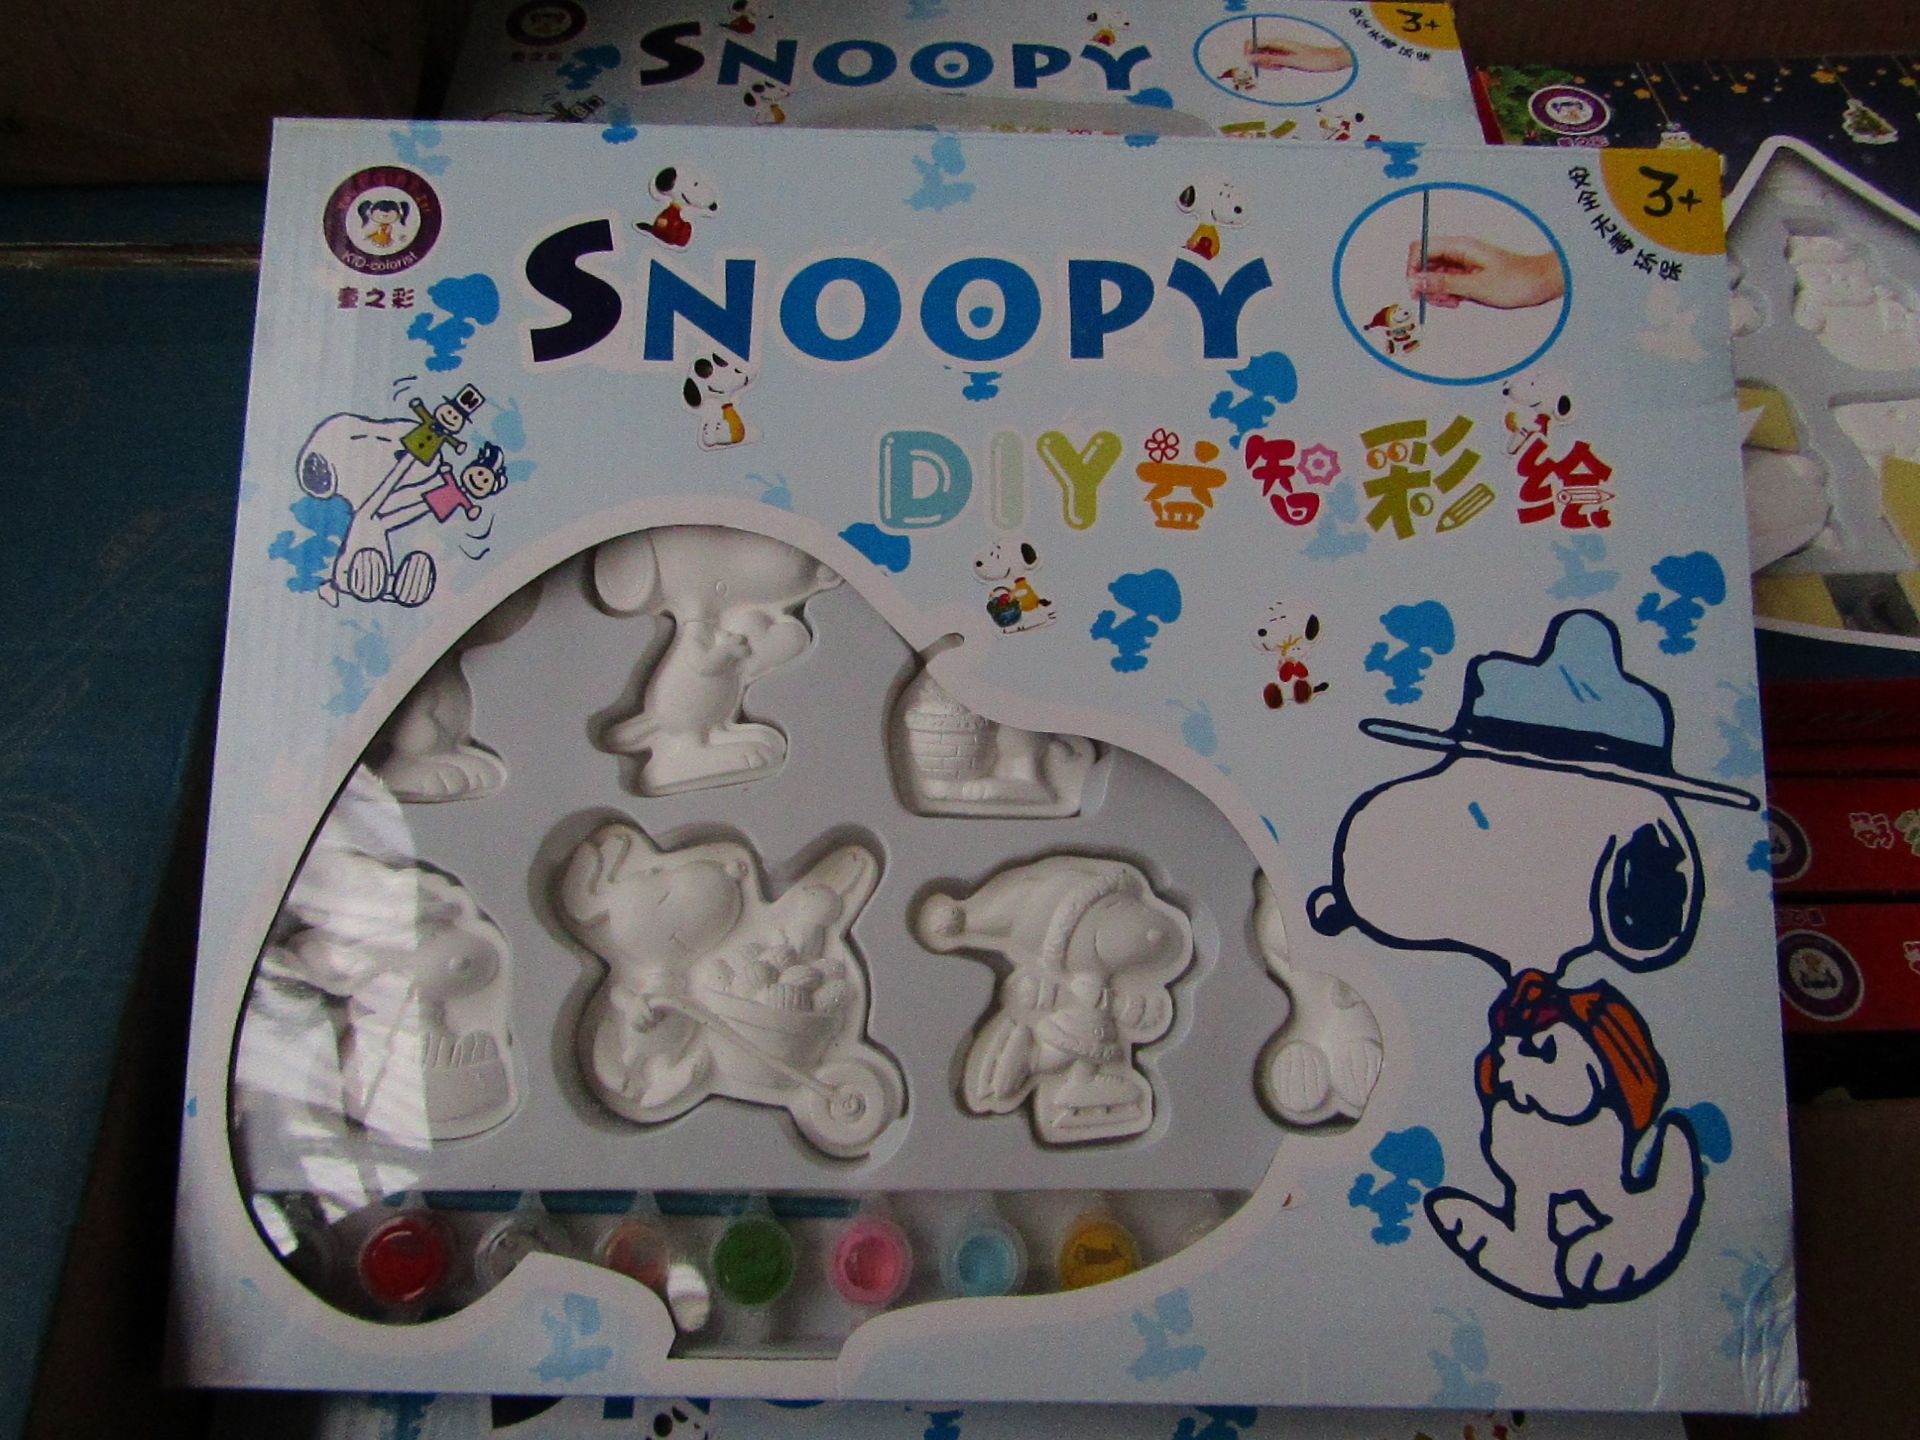 2x Snoopy DIY Kit - Paint Your Own Snoopy Figures - New & Boxed